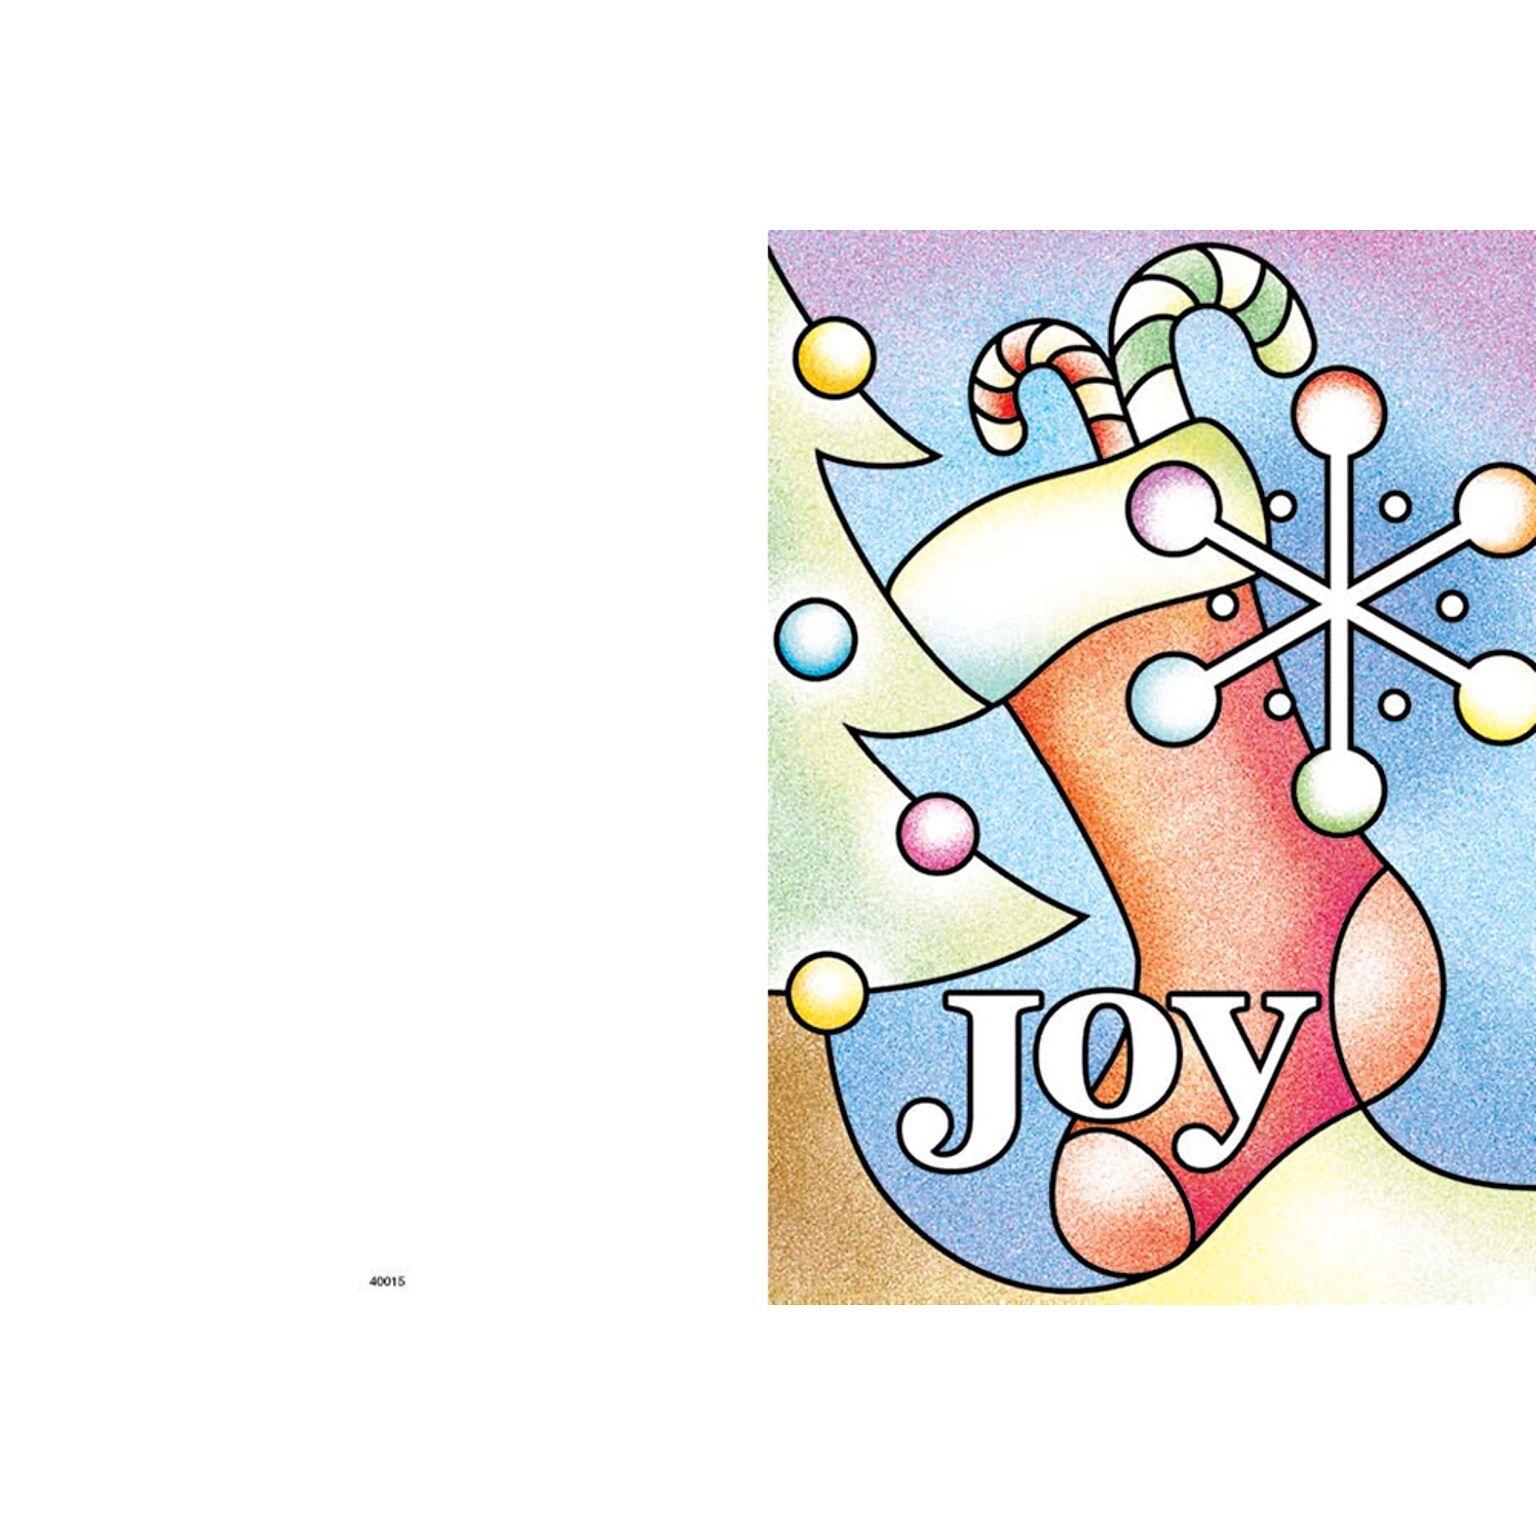 Joy with stocking , candy cane and snowflake - 7 x 10 scored for folding to 7 x 5, 25 cards w/A7 envelopes per set